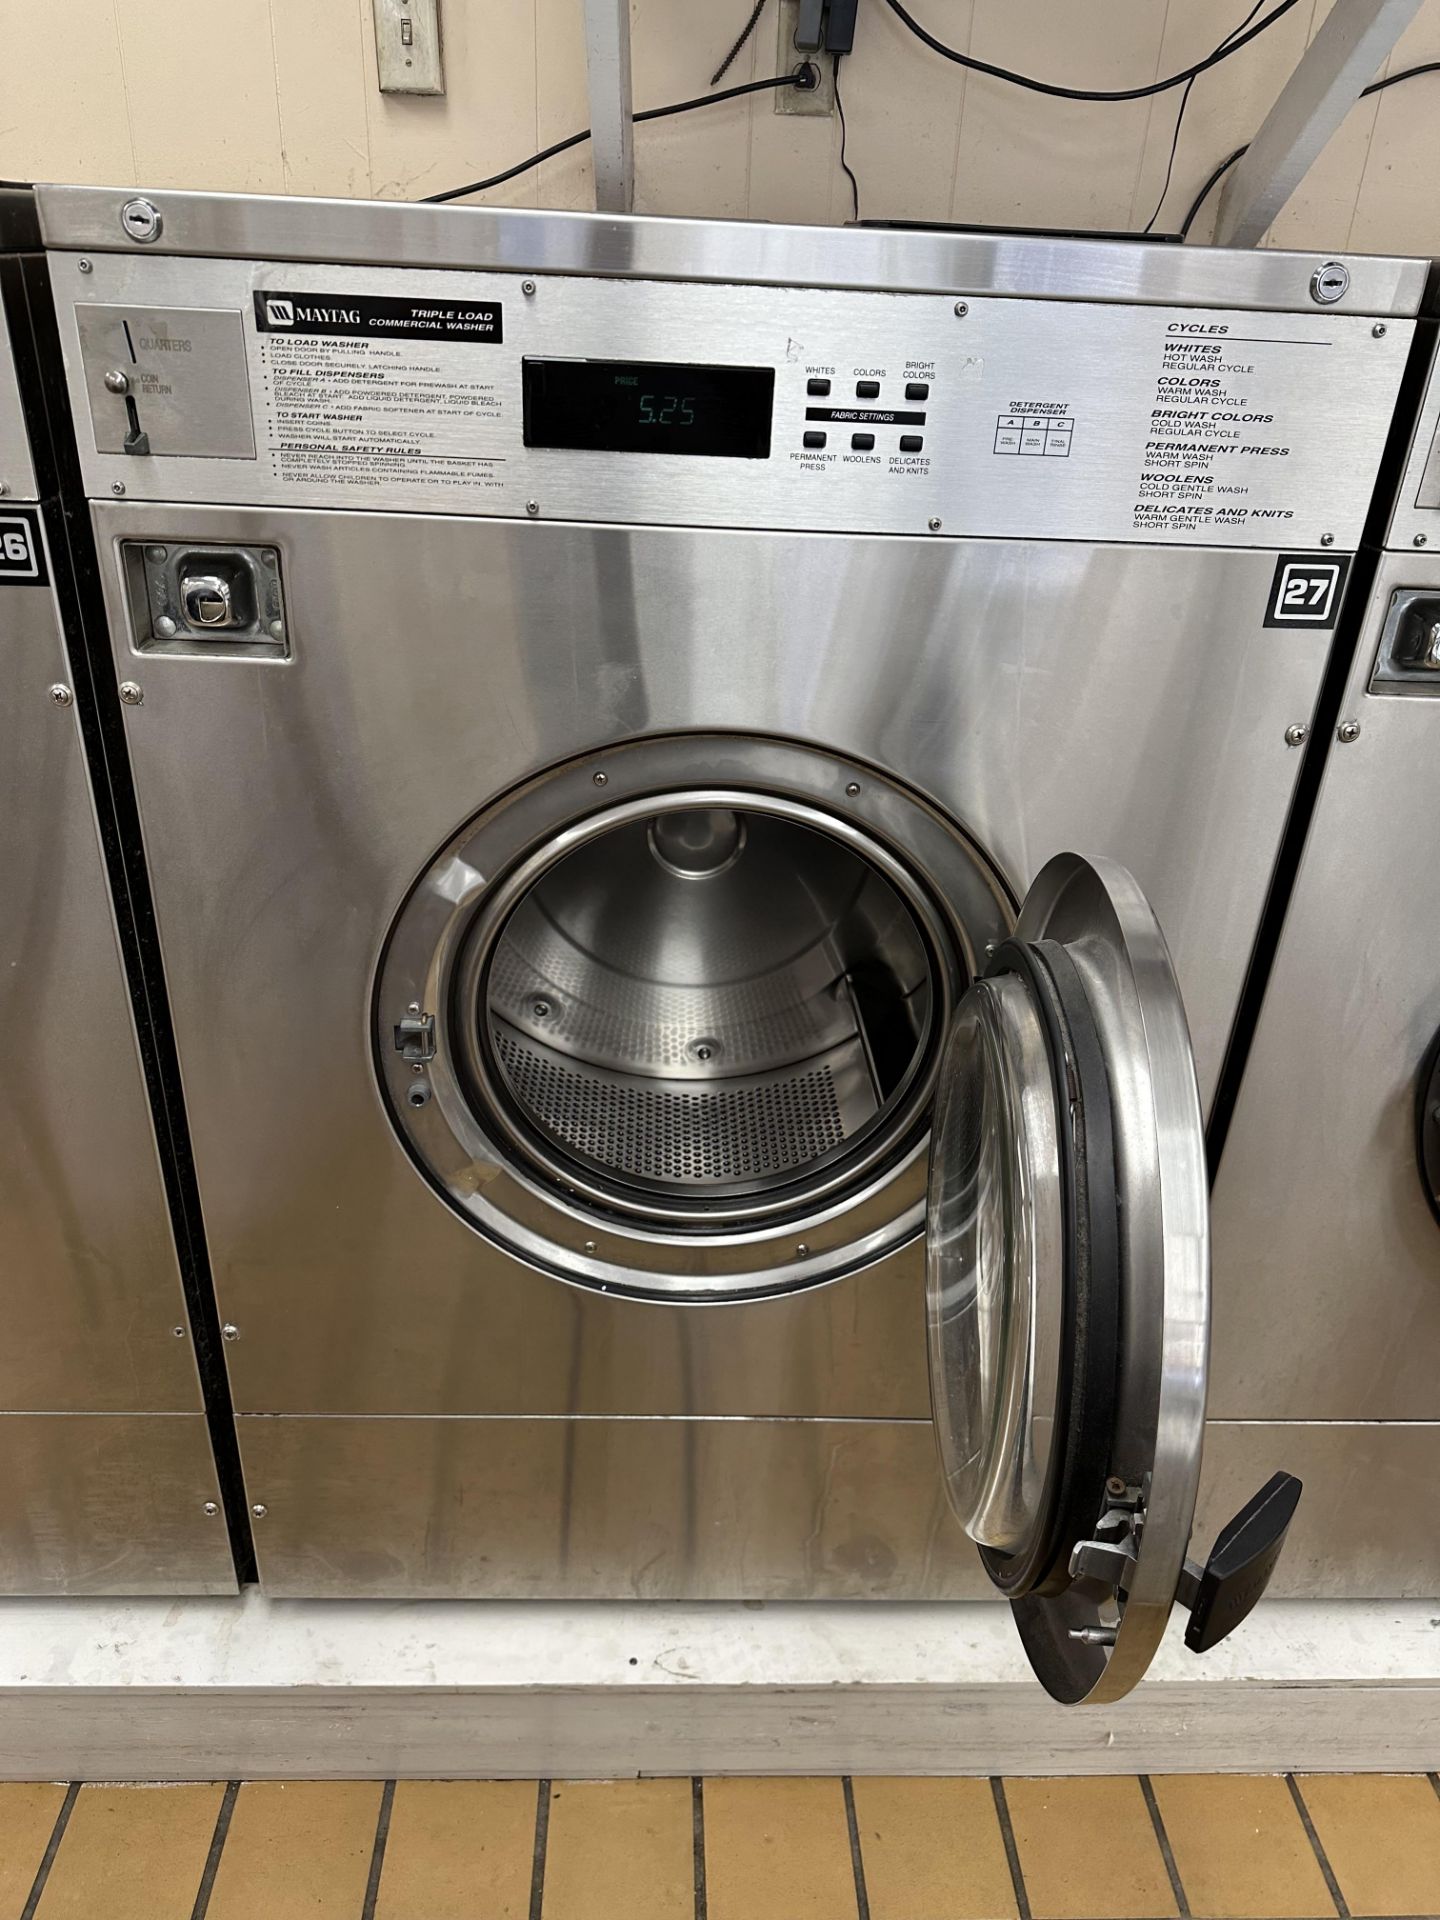 Maytag #MFR35PDATS Triple Load Commercial Washing Machine, 35 Lb. Load Capacity & Coin Operated,